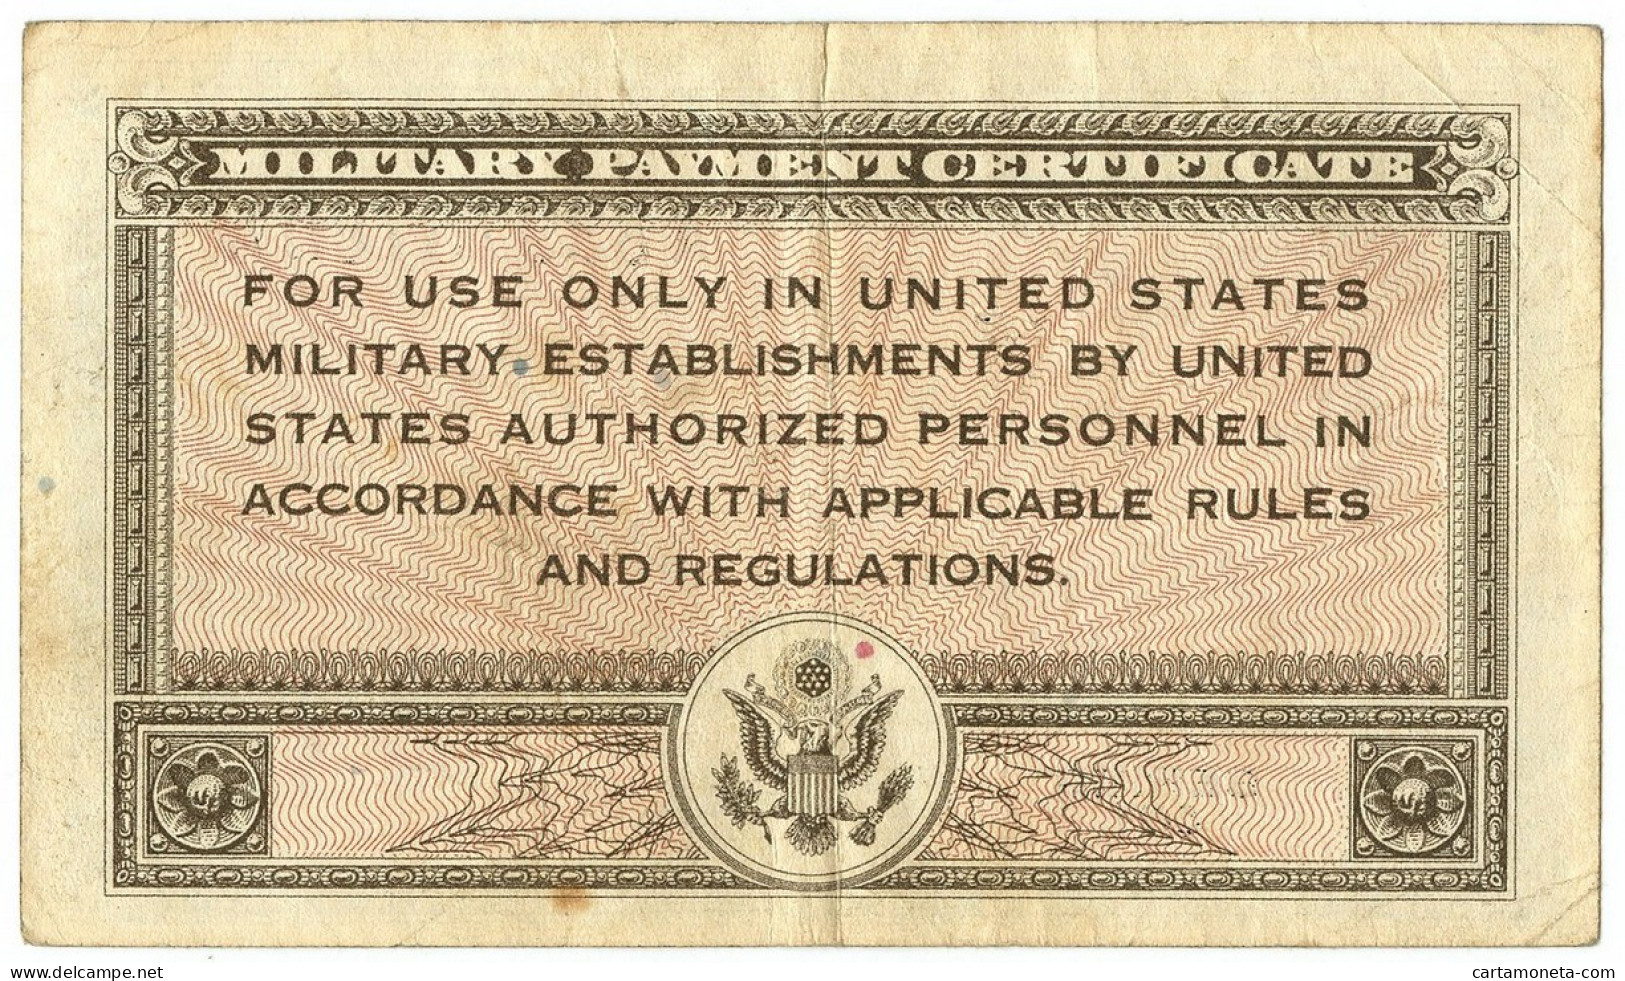 1 DOLLAR MILITARY PAYMENT CERTIFICATE UNITED STATES SERIES 461 17/09/1946 BB/BB+ - Occupation Alliés Seconde Guerre Mondiale